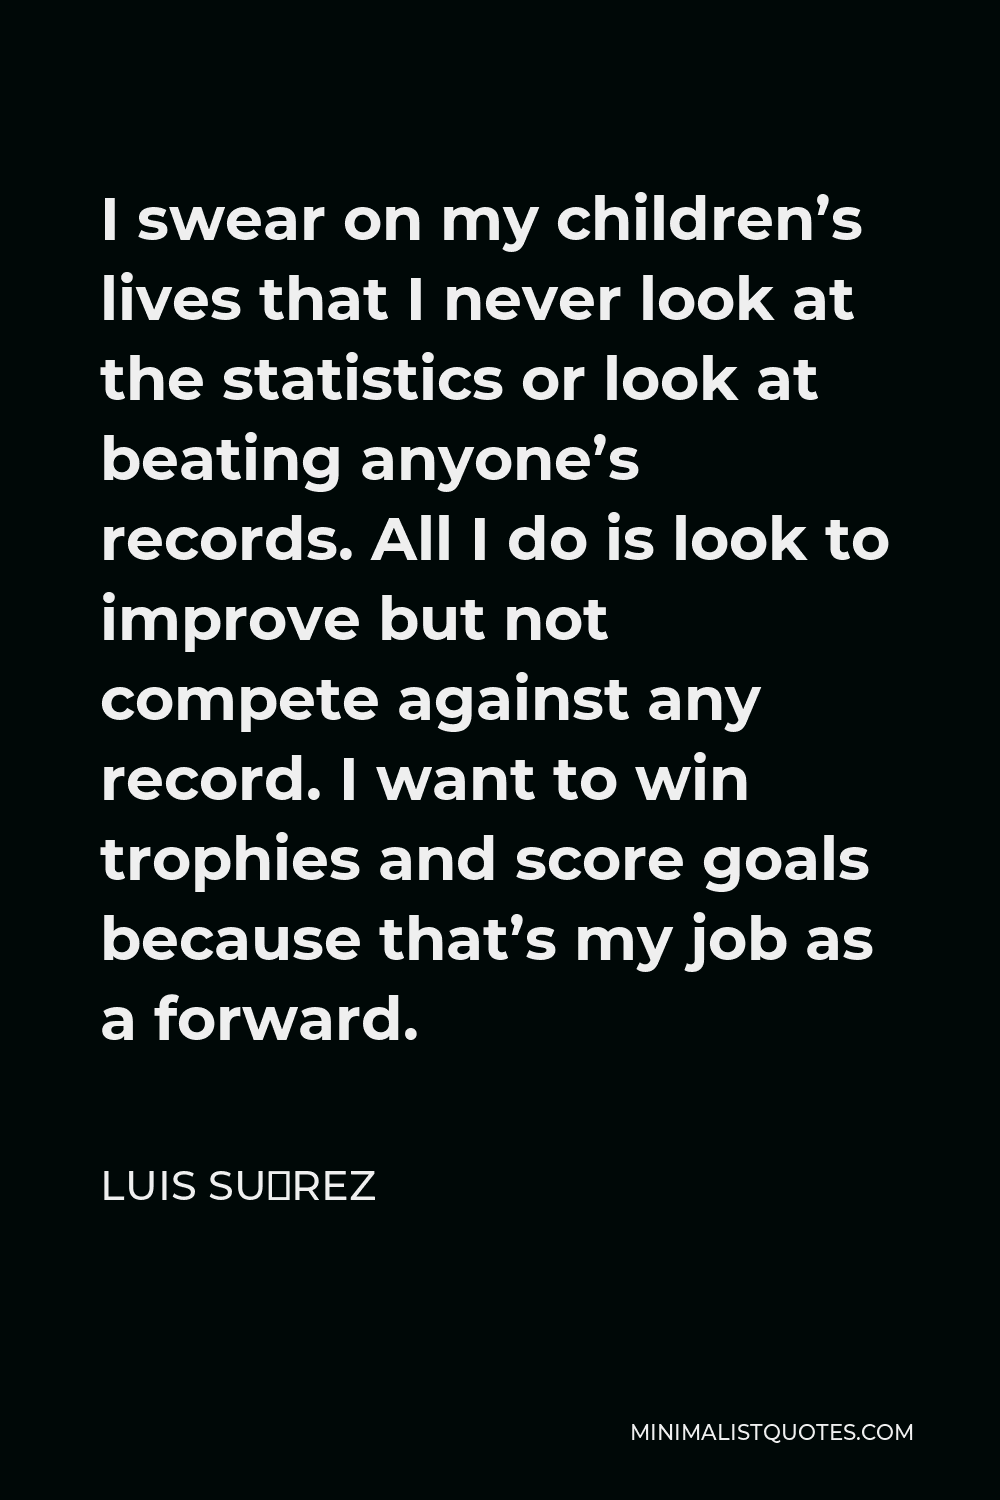 Luis Suárez Quote - I swear on my children’s lives that I never look at the statistics or look at beating anyone’s records. All I do is look to improve but not compete against any record. I want to win trophies and score goals because that’s my job as a forward.